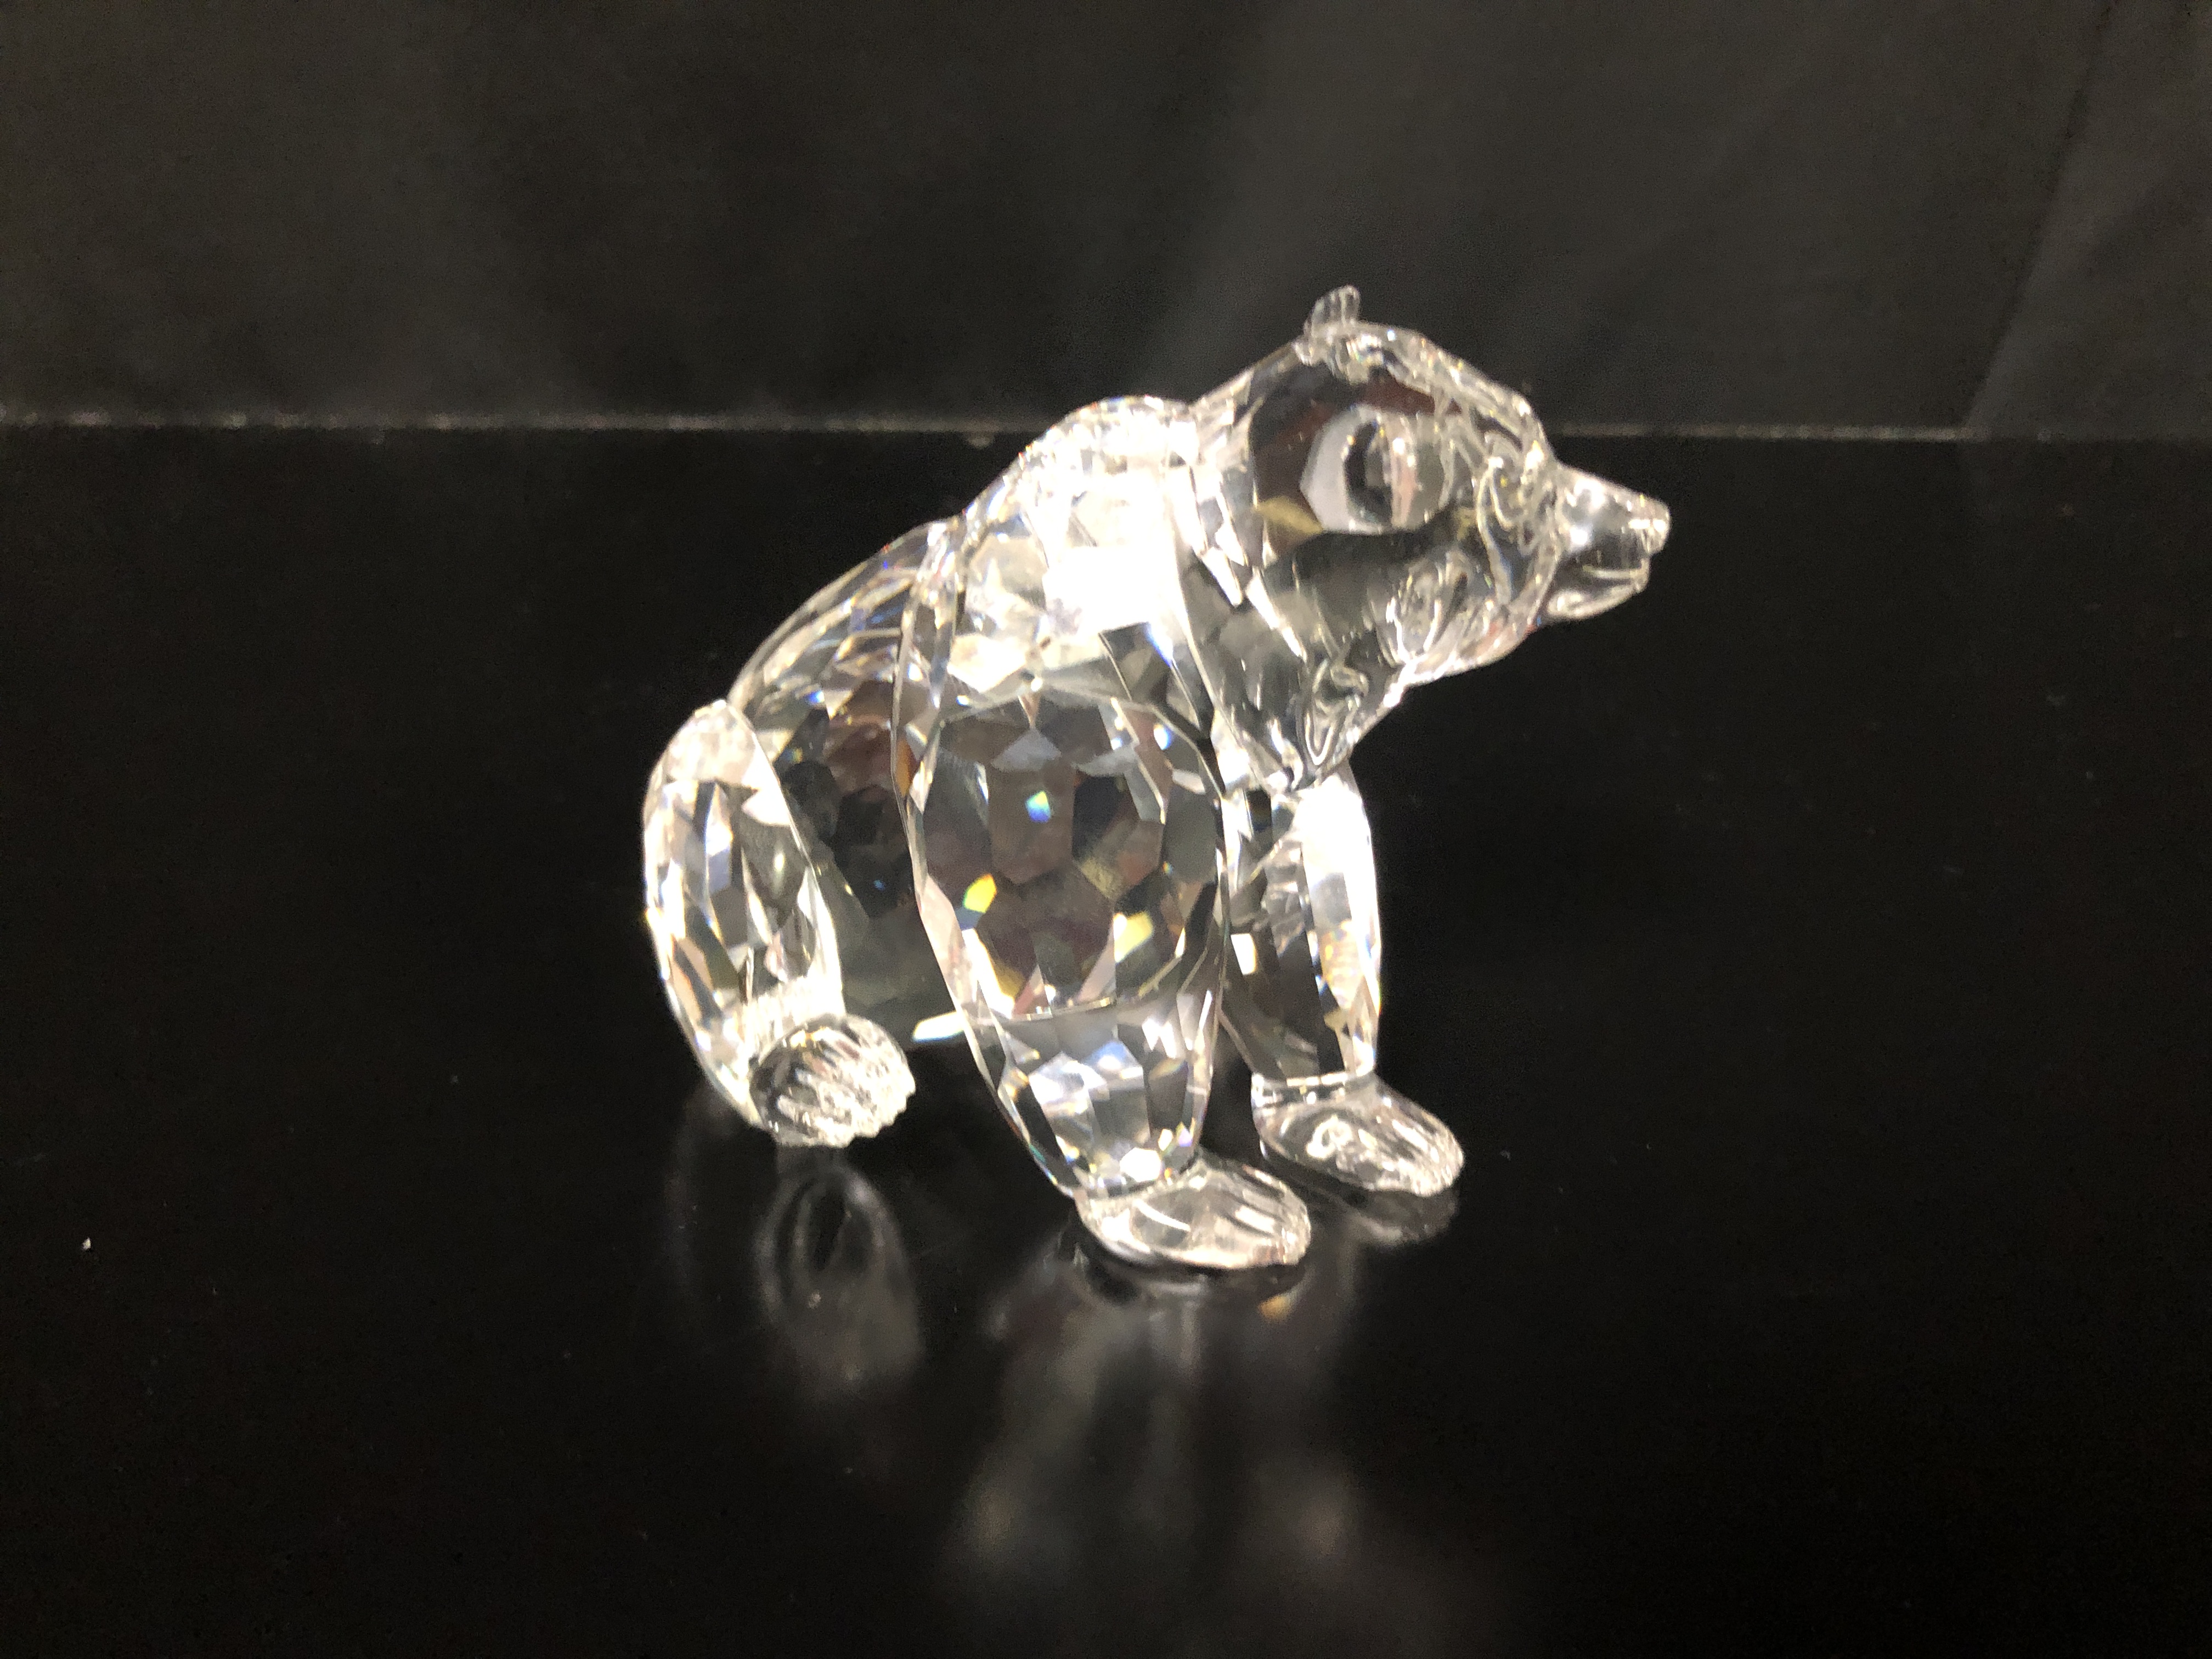 A BOXED SWAROVSKI SILVER CRYSTAL GRIZZLY BEAR. - Image 2 of 4